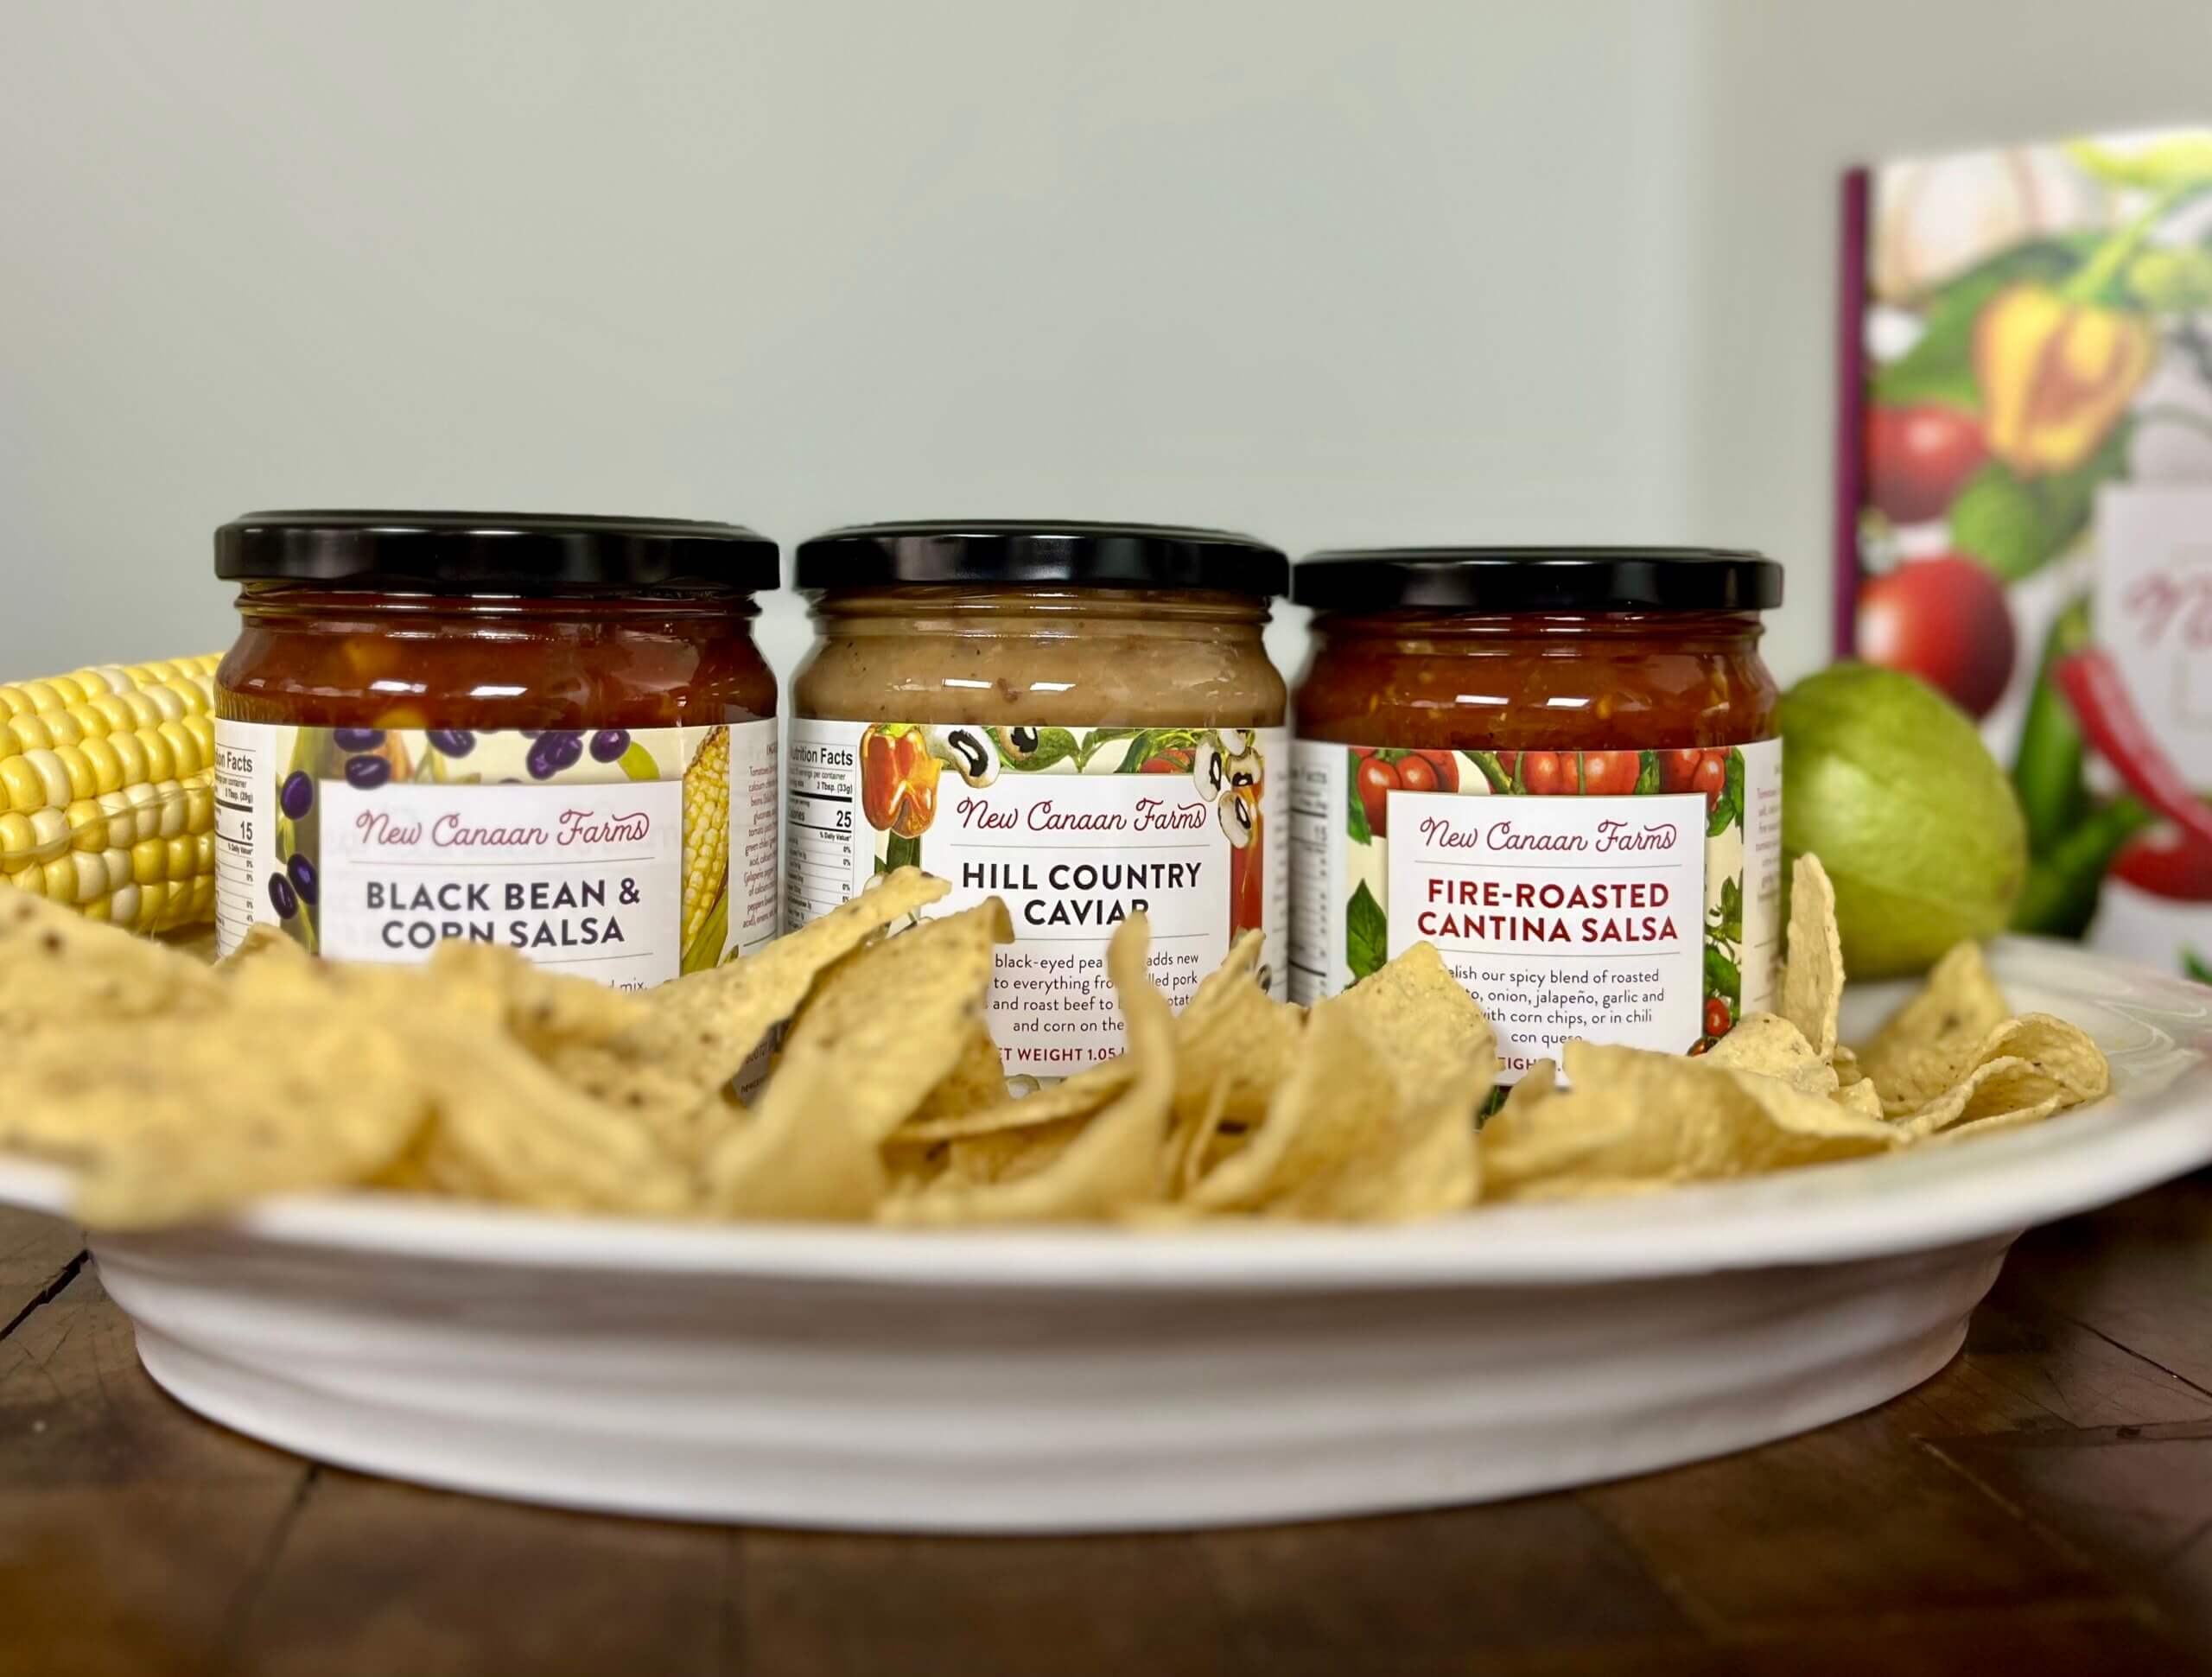 New Canaan Farms Black Bean & Corn, Hill Country and Fire-Roasted Cantina salsas, surrounded by tortilla chips